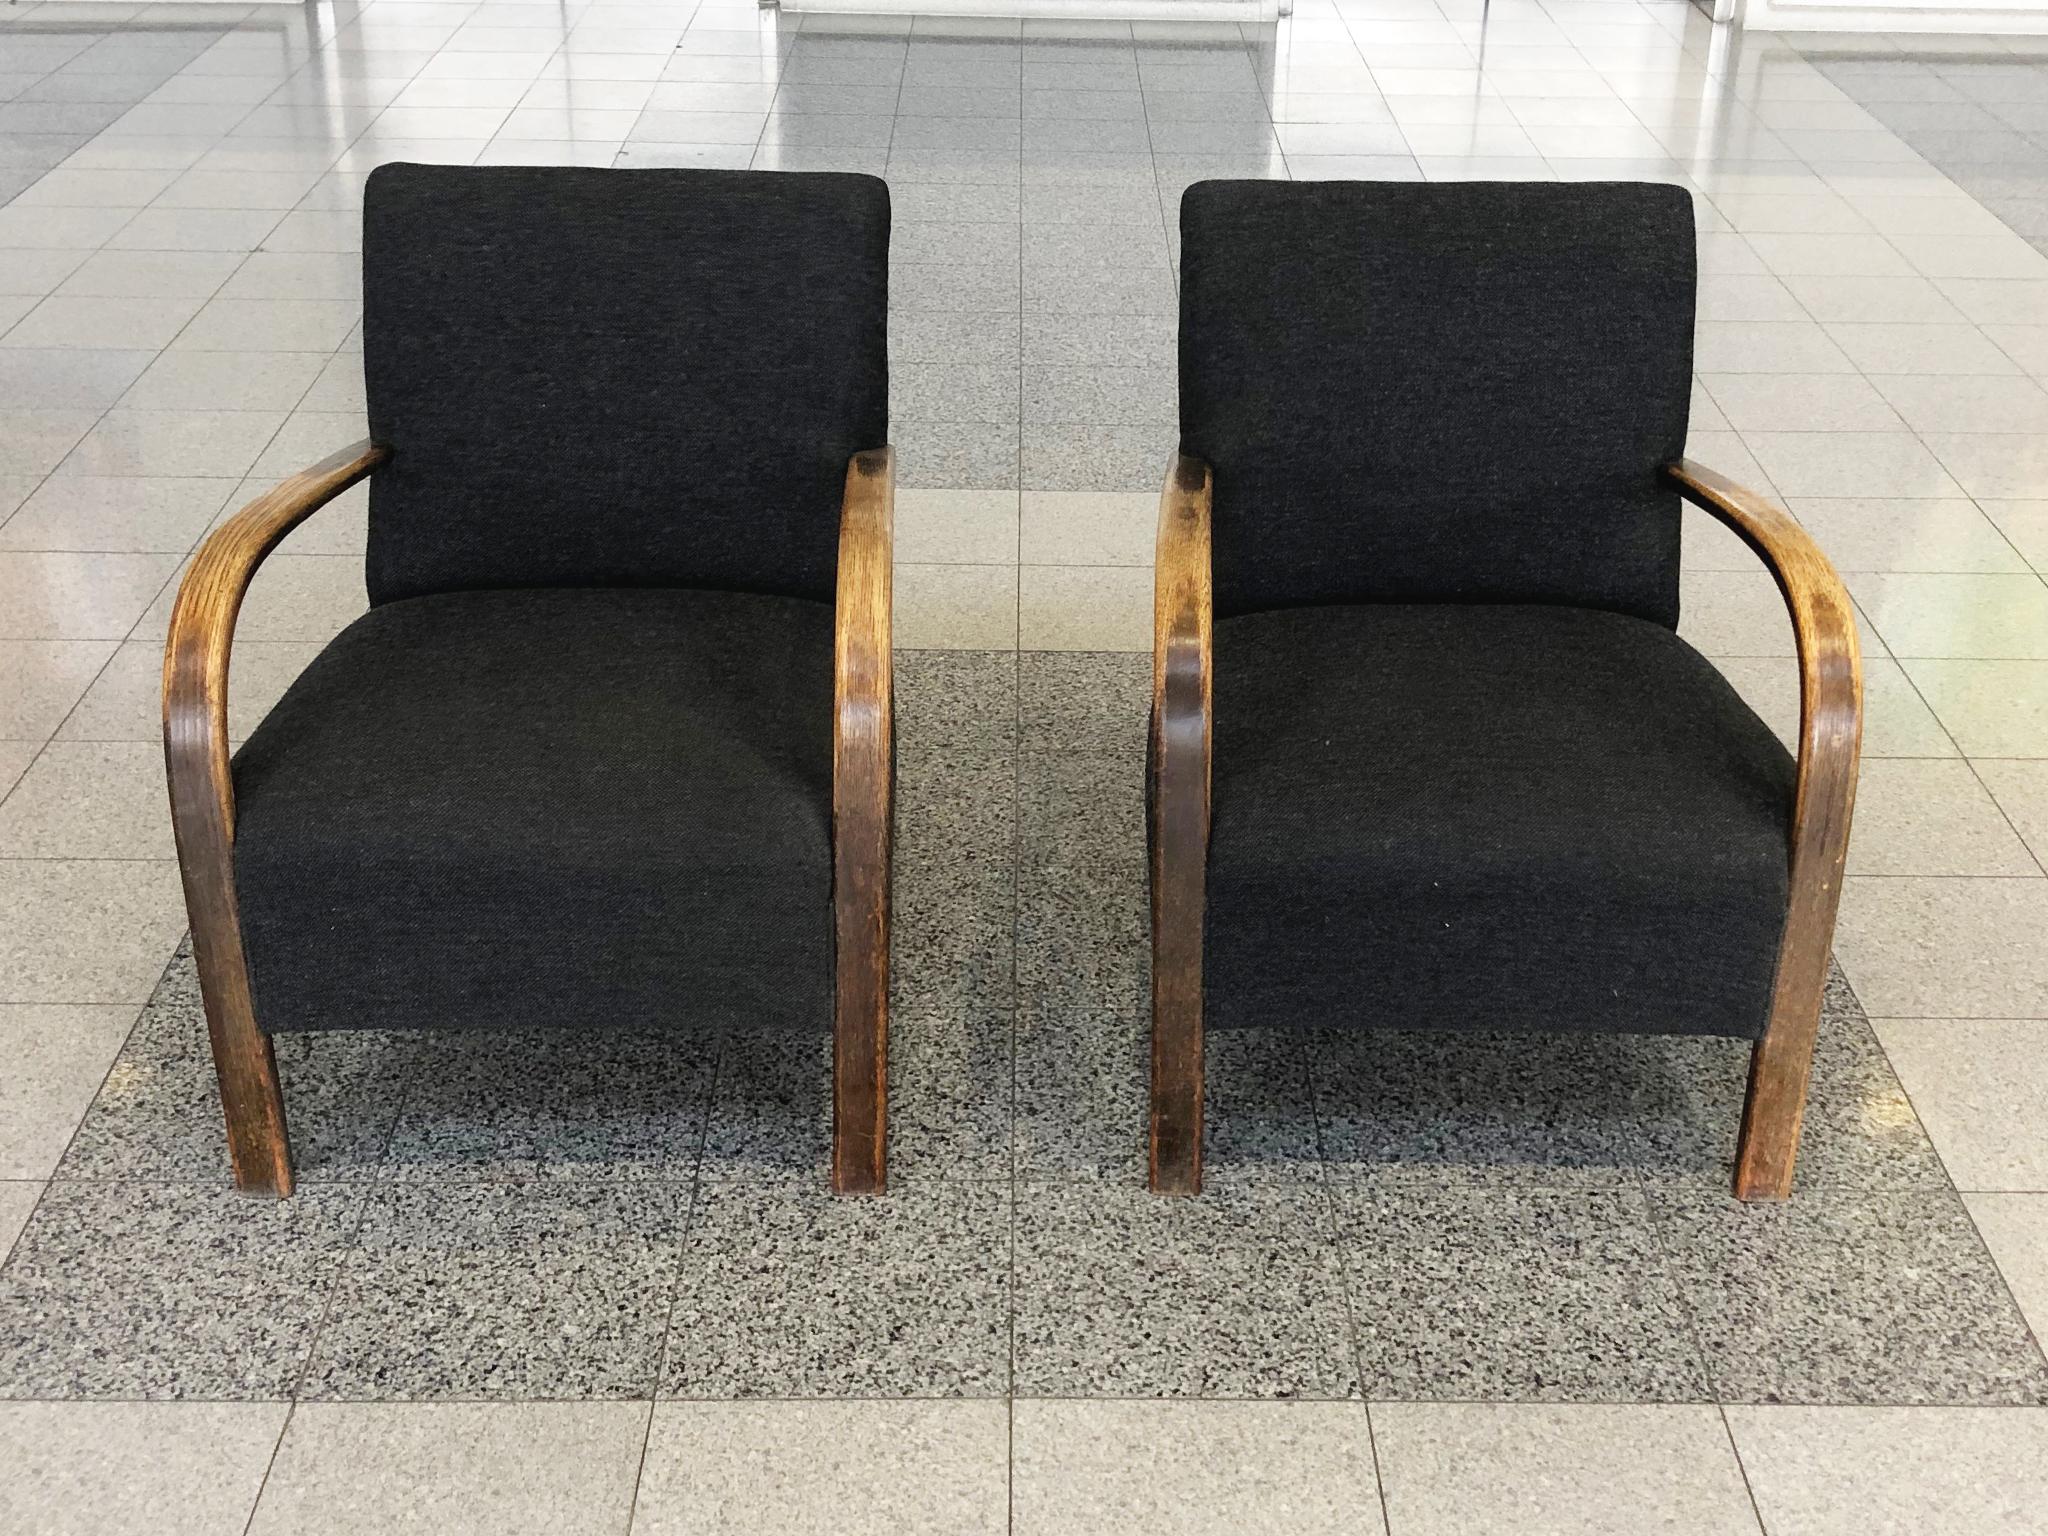 These exquisite Danish lounge chairs by Fritz Hansen were crafted in the 1950s. They are comprised of bent oak and later reupholstered in a black wool fabric. The bentwood arms have aged beautifully. We love their thin, elegant forms in comparison